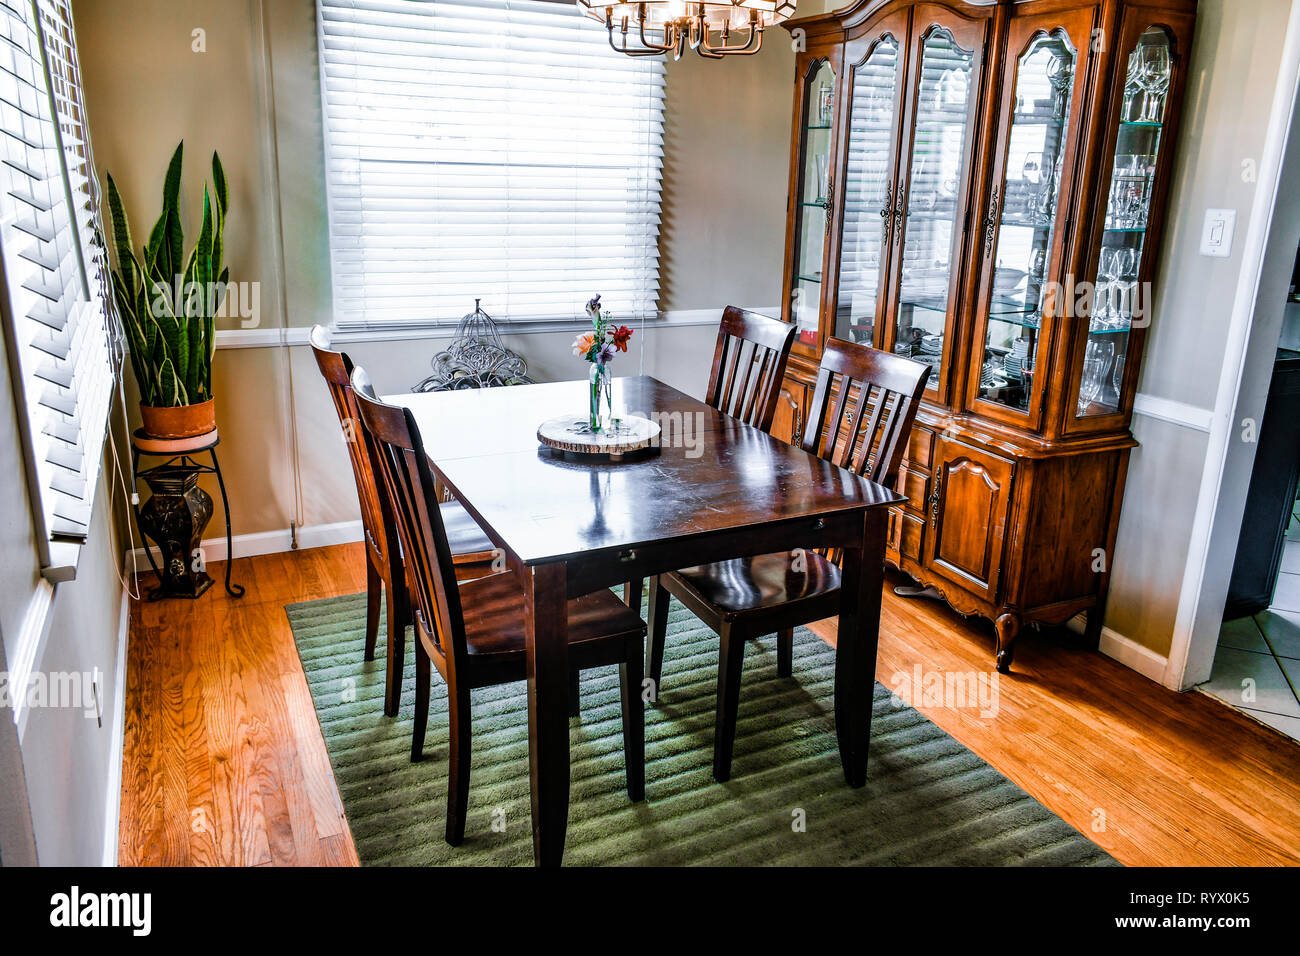 A dining room table and china cabinet on a hardwood floor with a green rug.  Snake plant and flowers on display. Stock Photo